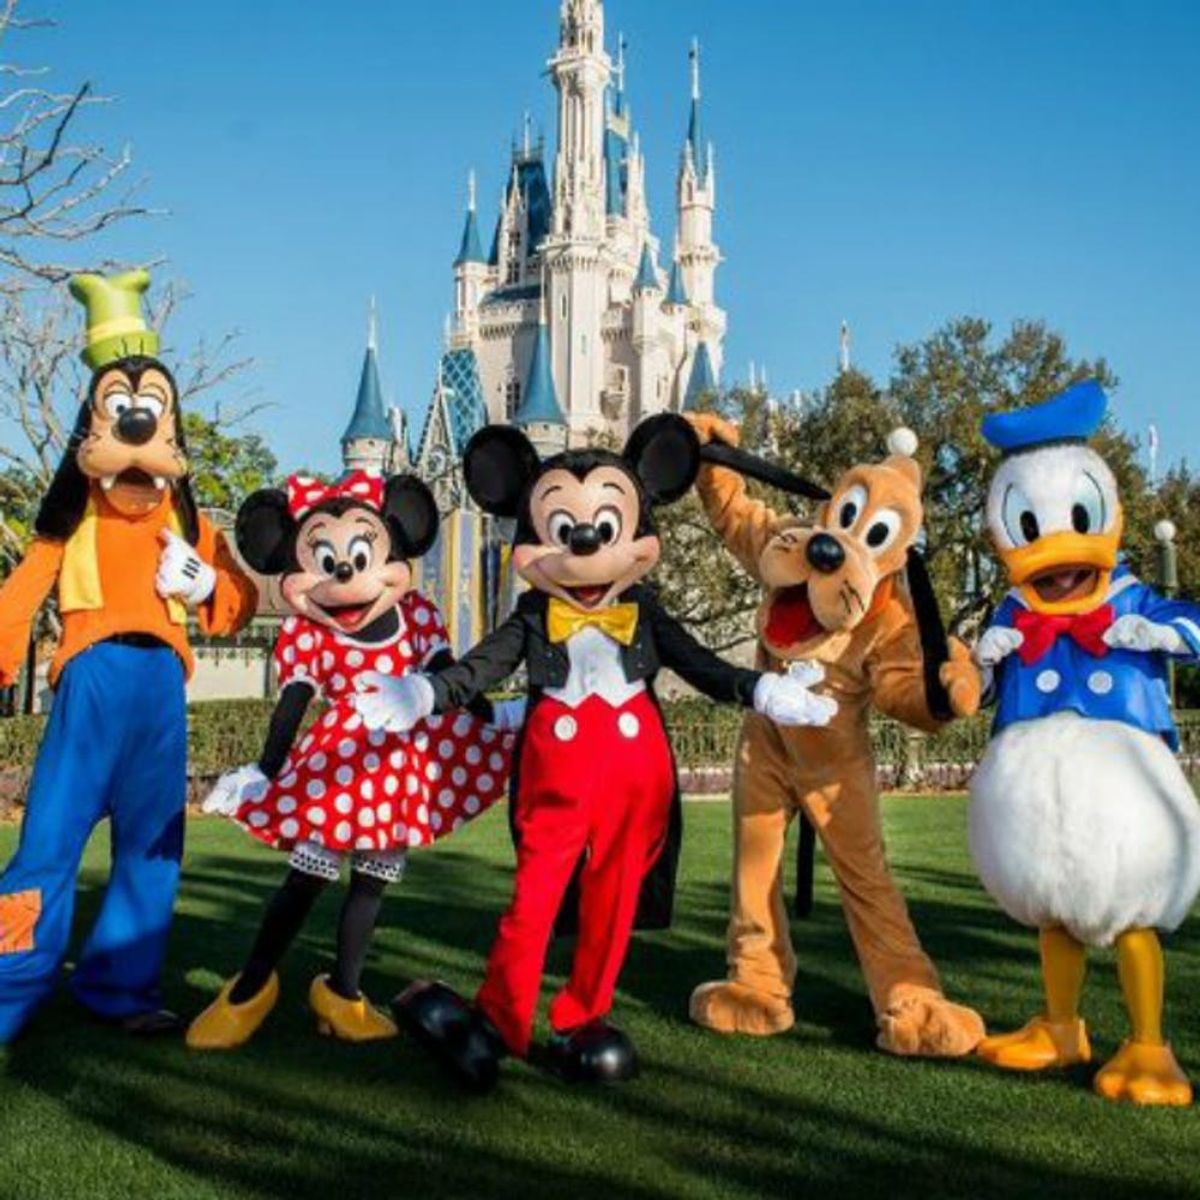 Disney Parks May Start Tracking Its Visitors in This Totally Weird Way